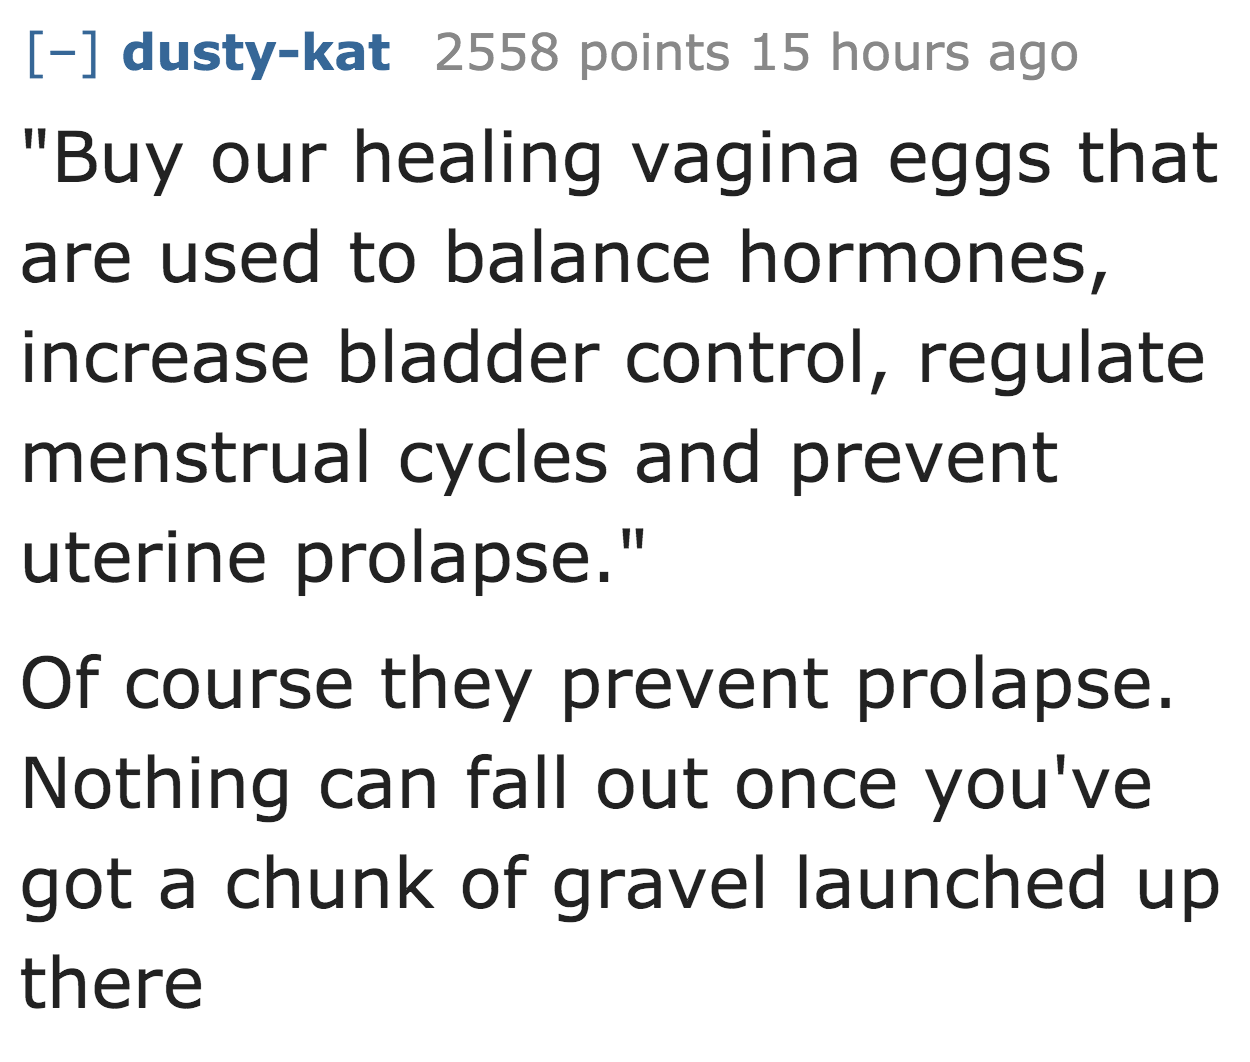 dustykat 2558 points 15 hours ago "Buy our healing vagina eggs that are used to balance hormones, increase bladder control, regulate menstrual cycles and prevent uterine prolapse." Of course they prevent prolapse. Nothing can fall out once you've got a…